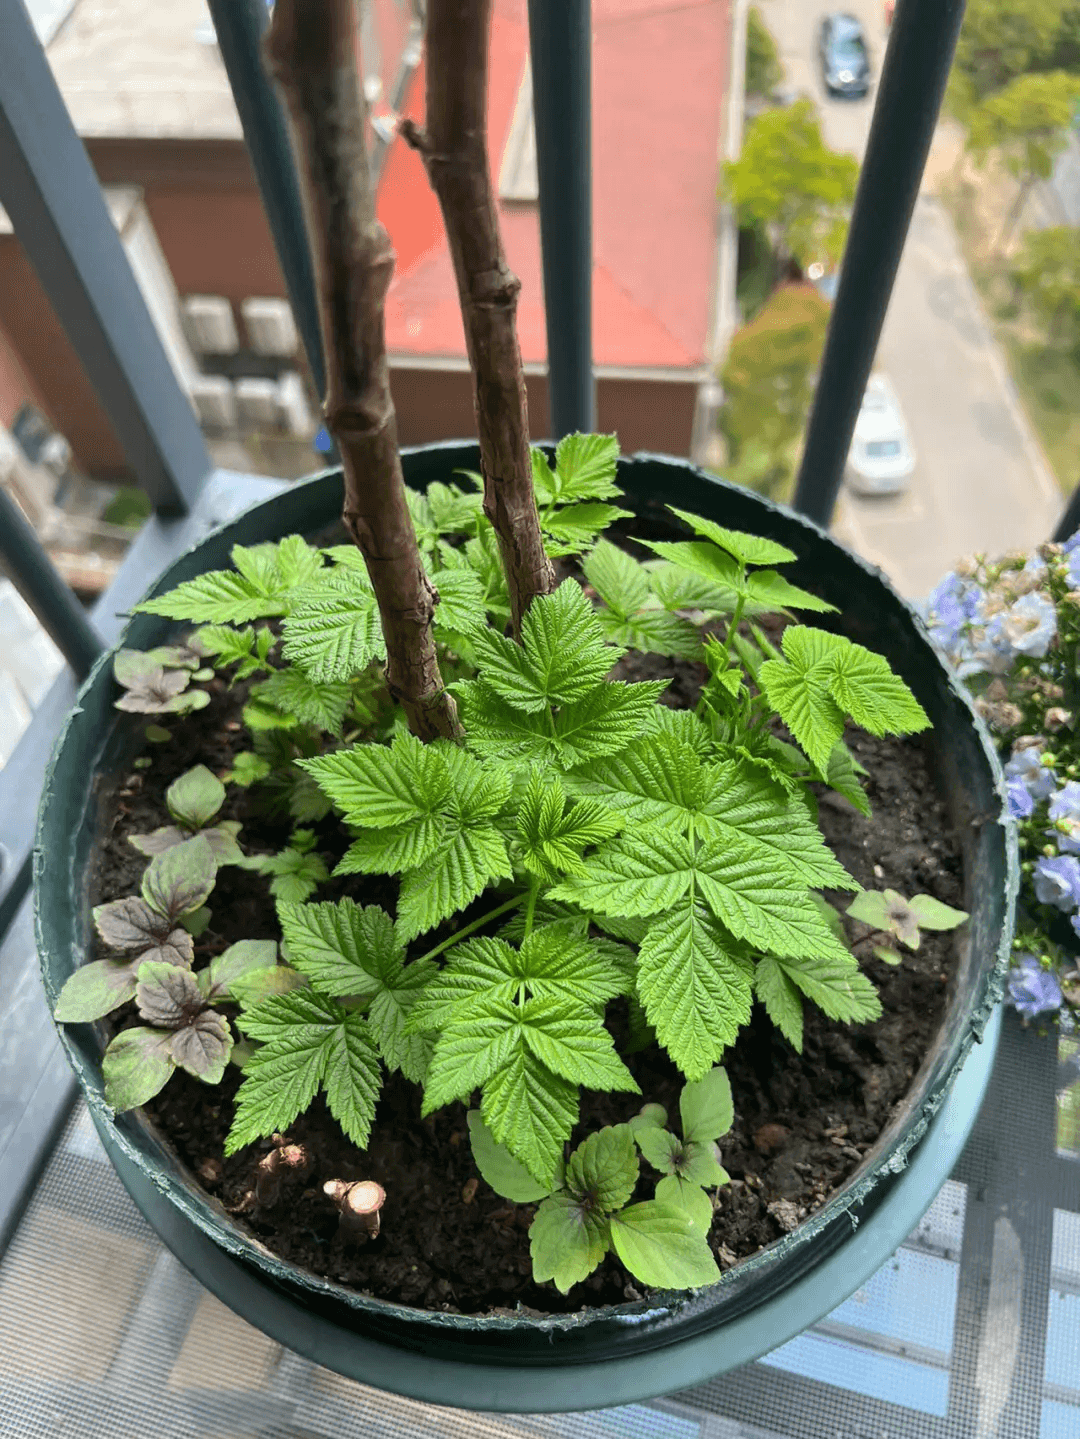 Grewing Raspberries in the Right Containers